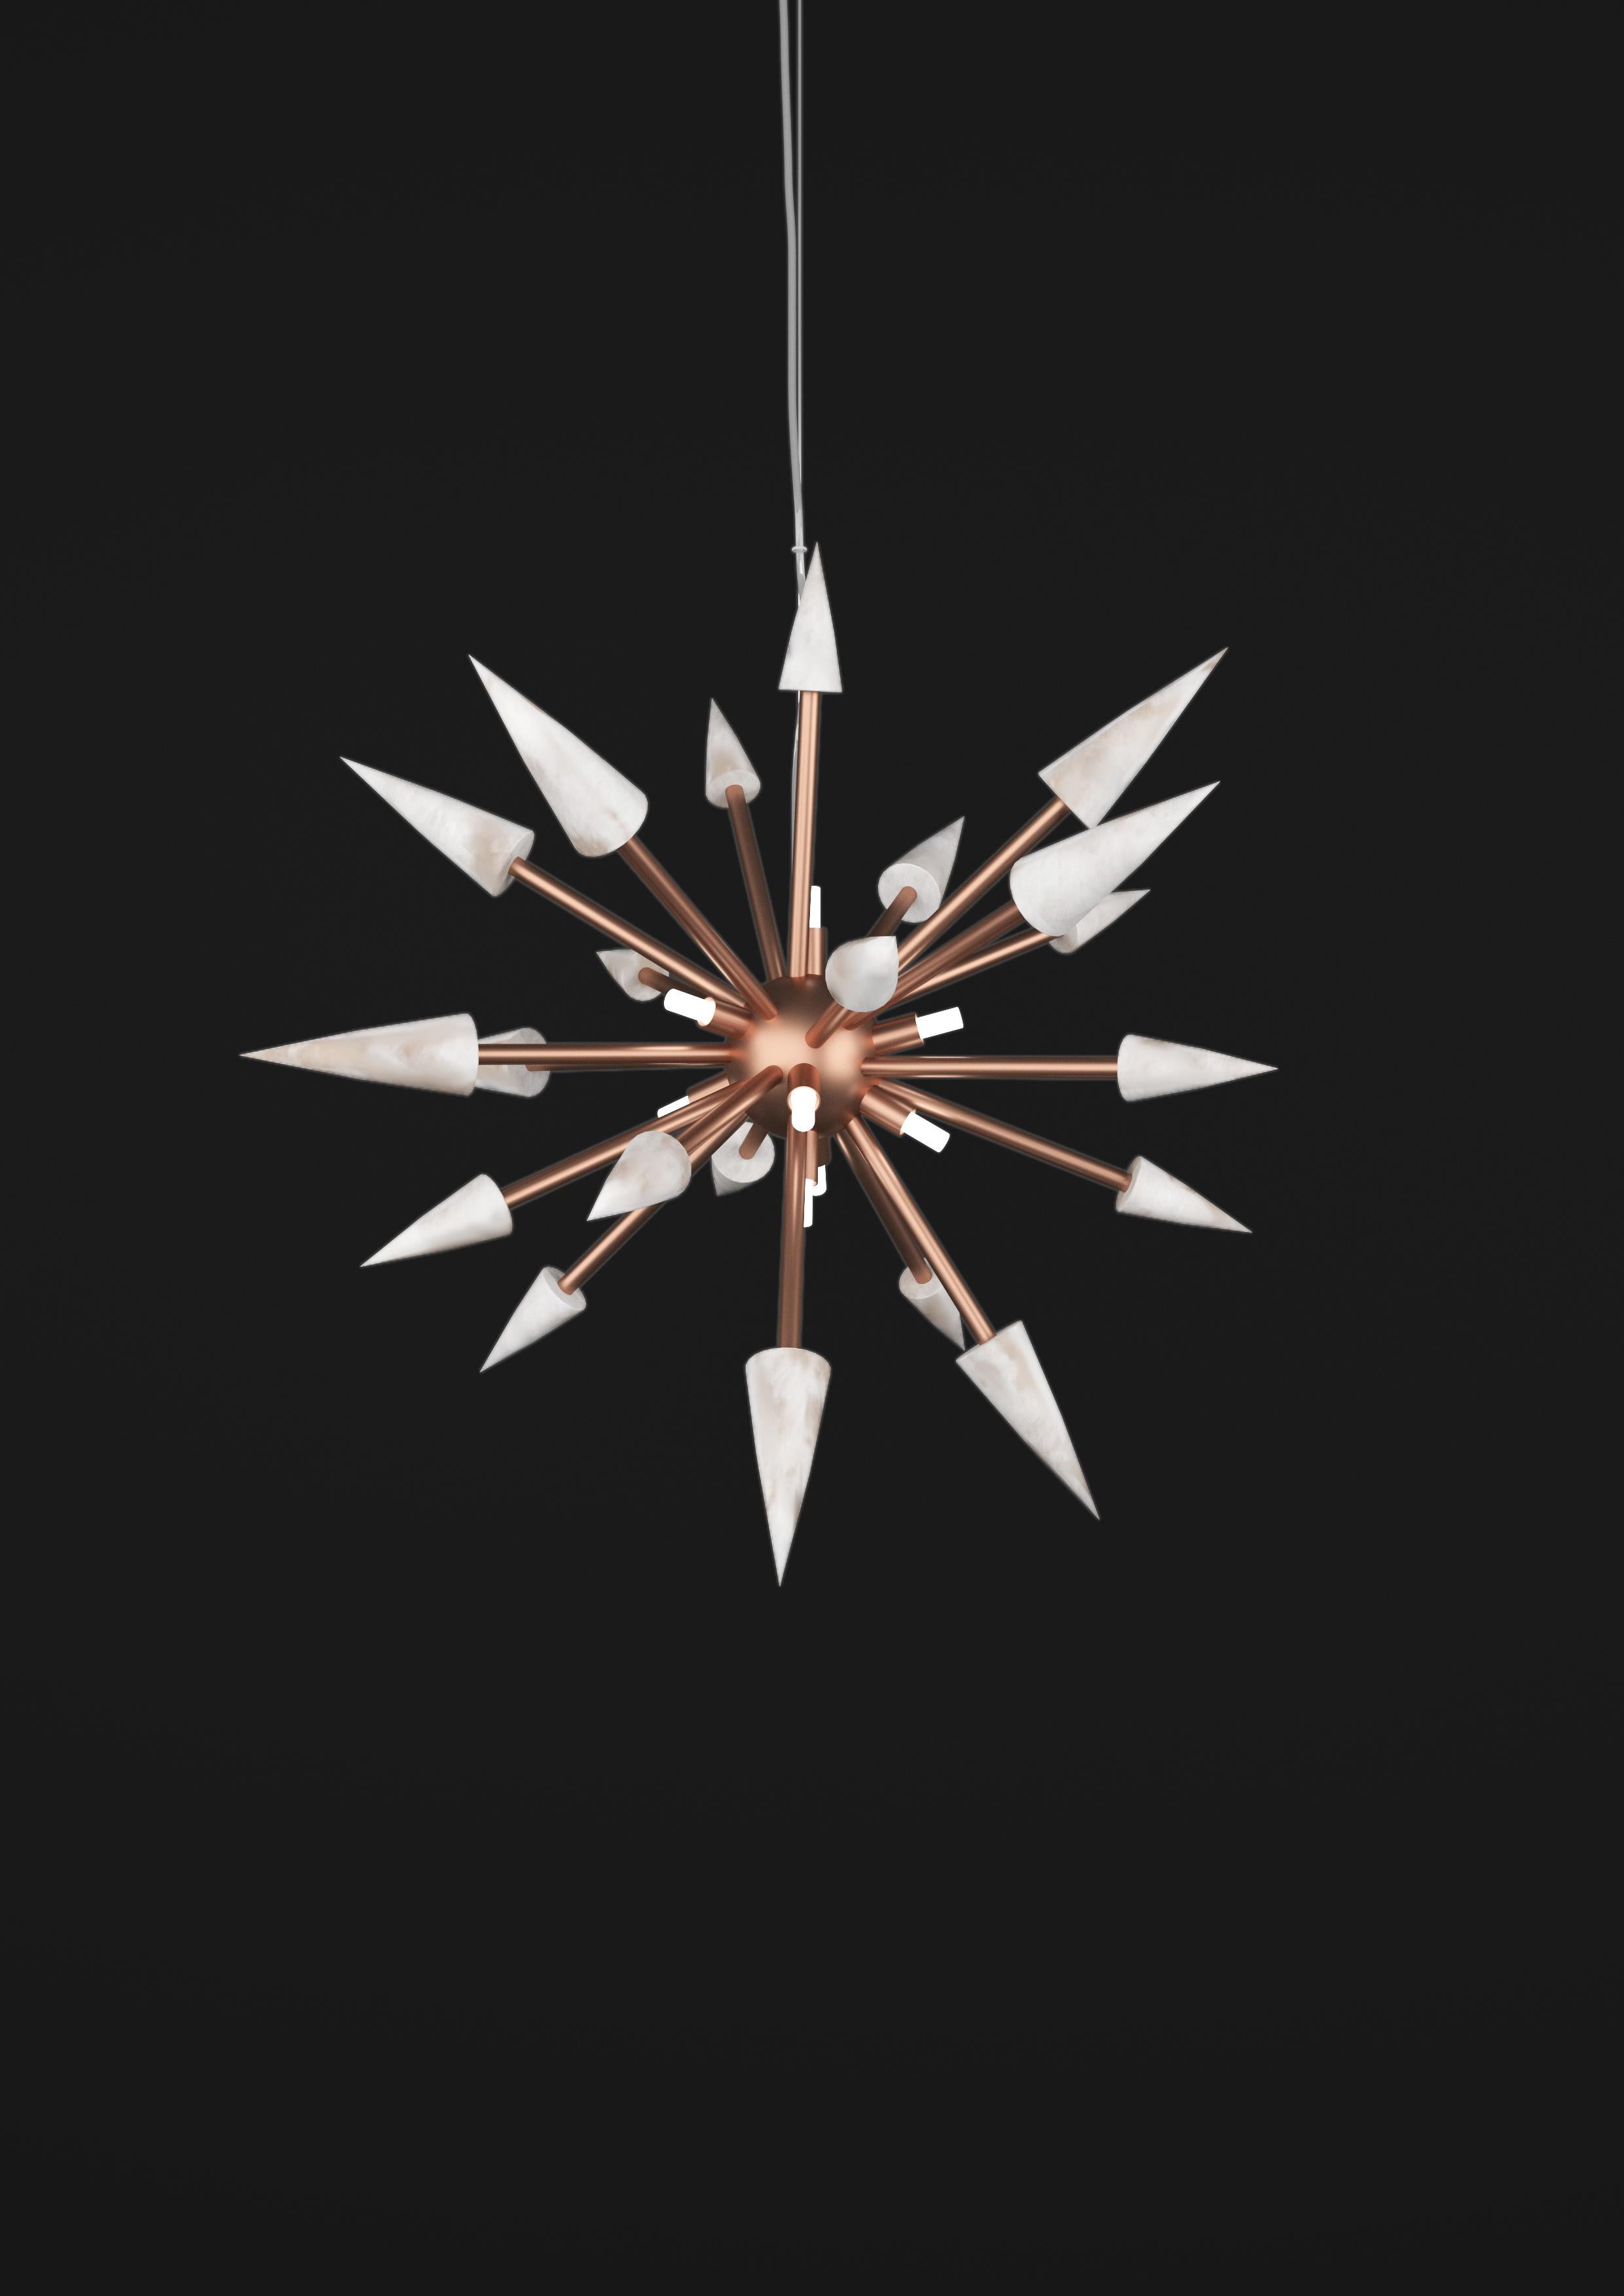 Perseo 50 Copper Pendant Lamp by Alabastro Italiano
Dimensions: Ø 50 x H 300 cm.
Materials: White alabaster and copper.

Available in different finishes: Shiny Silver, Bronze, Brushed Brass, Ruggine of Florence, Brushed Burnished, Shiny Gold,